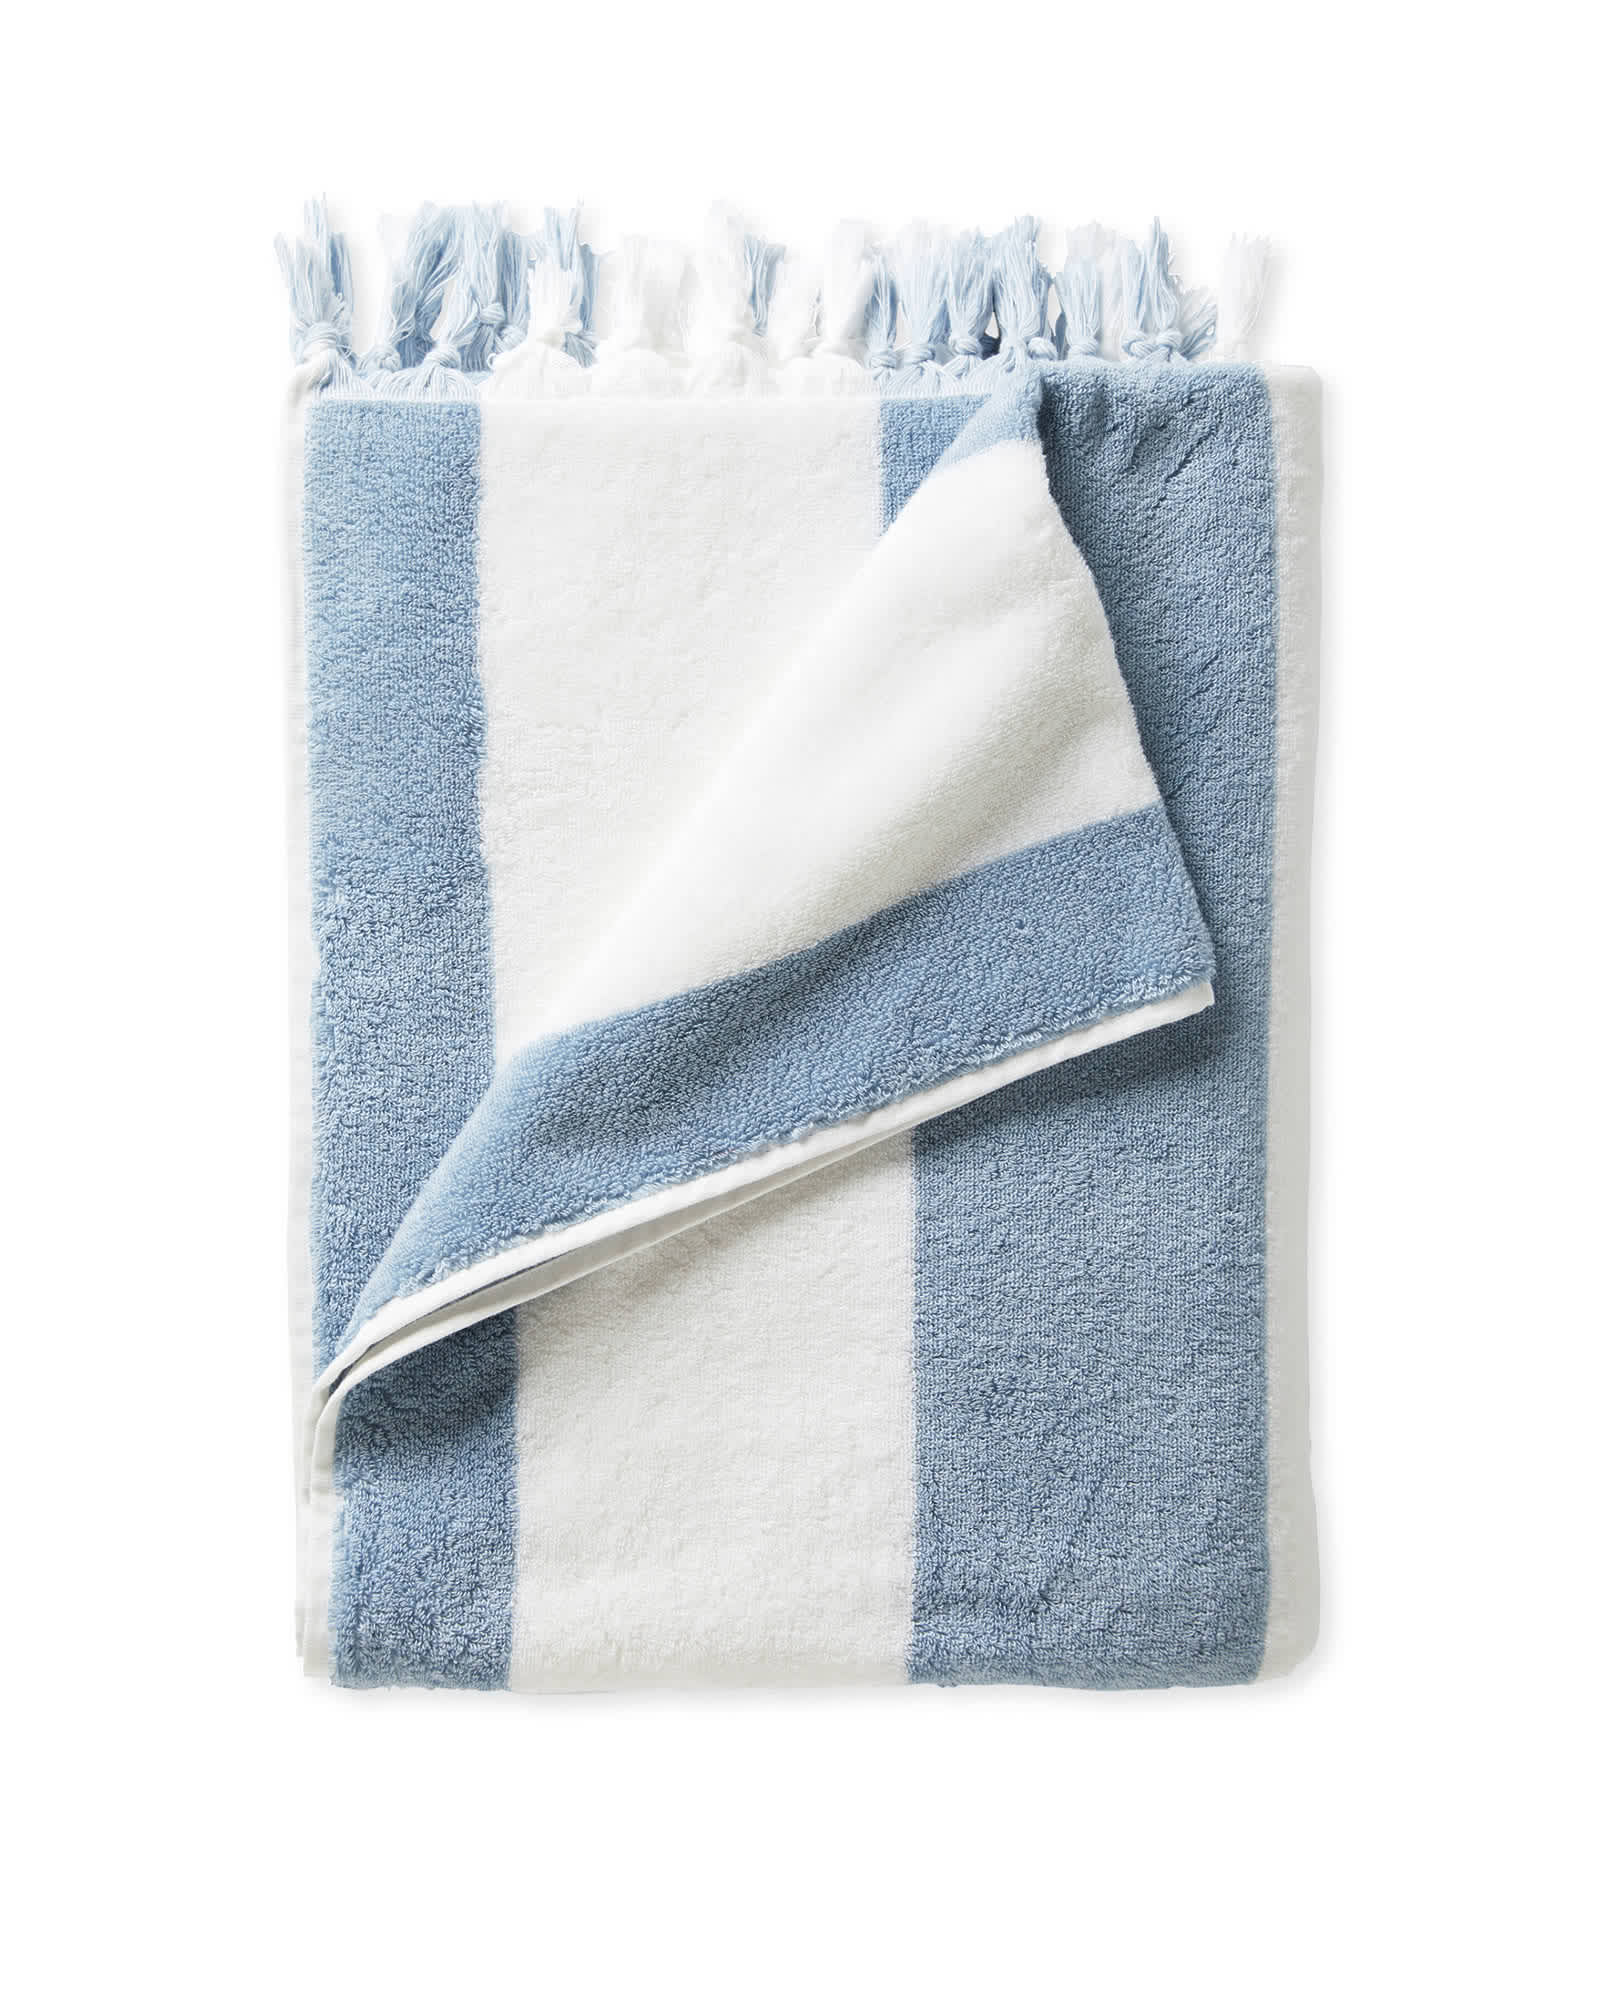 Ecoexistence - We love these bath/beach towels that